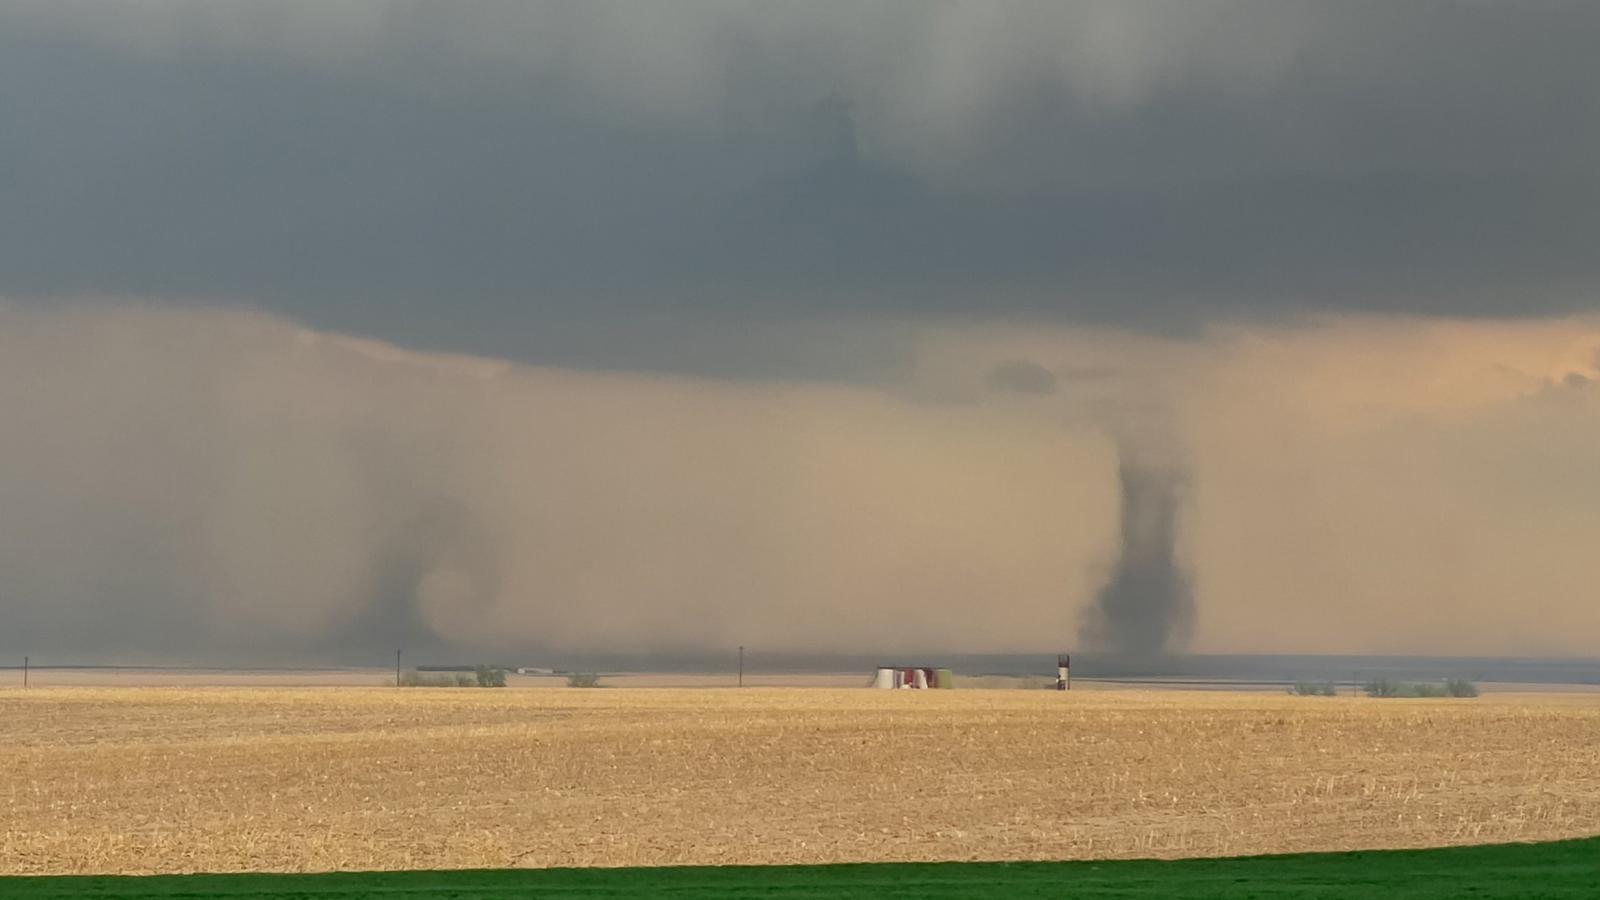 Land spout tornado and near-ground horizontal roll east of Denver, CO (photo credit Greg Robbin)